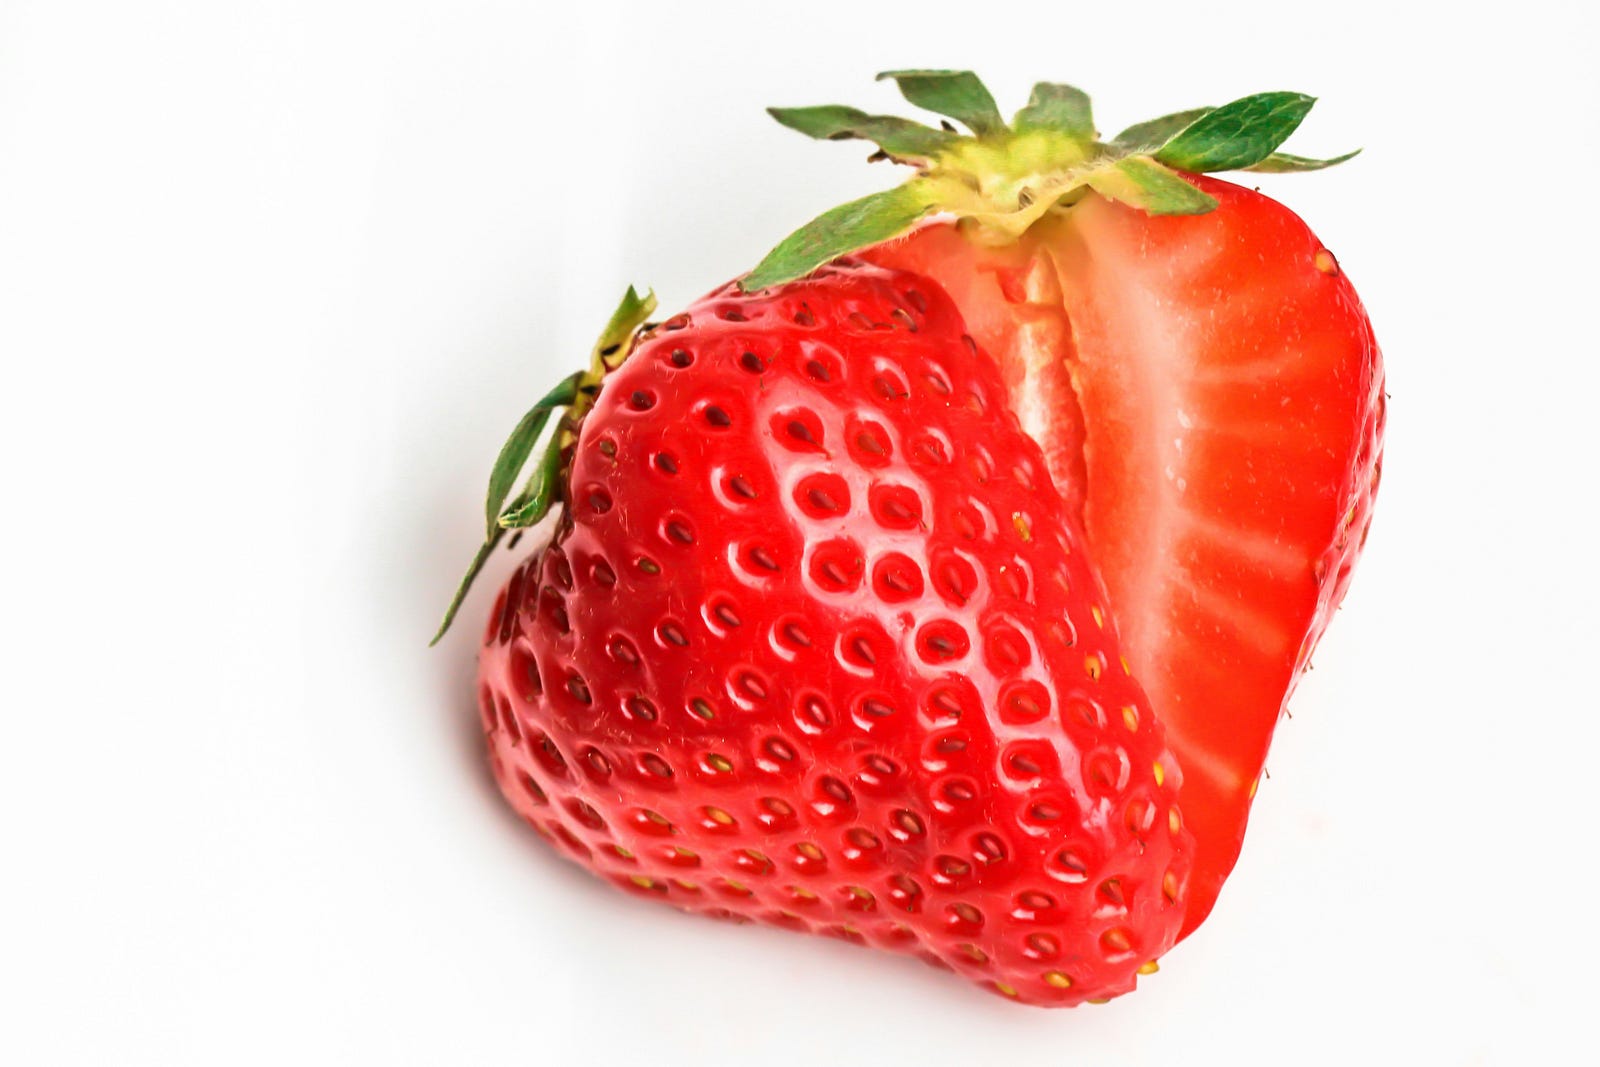 A single strawberry, cut in two. Vitamin C-containing foods may reduce dementia risk.